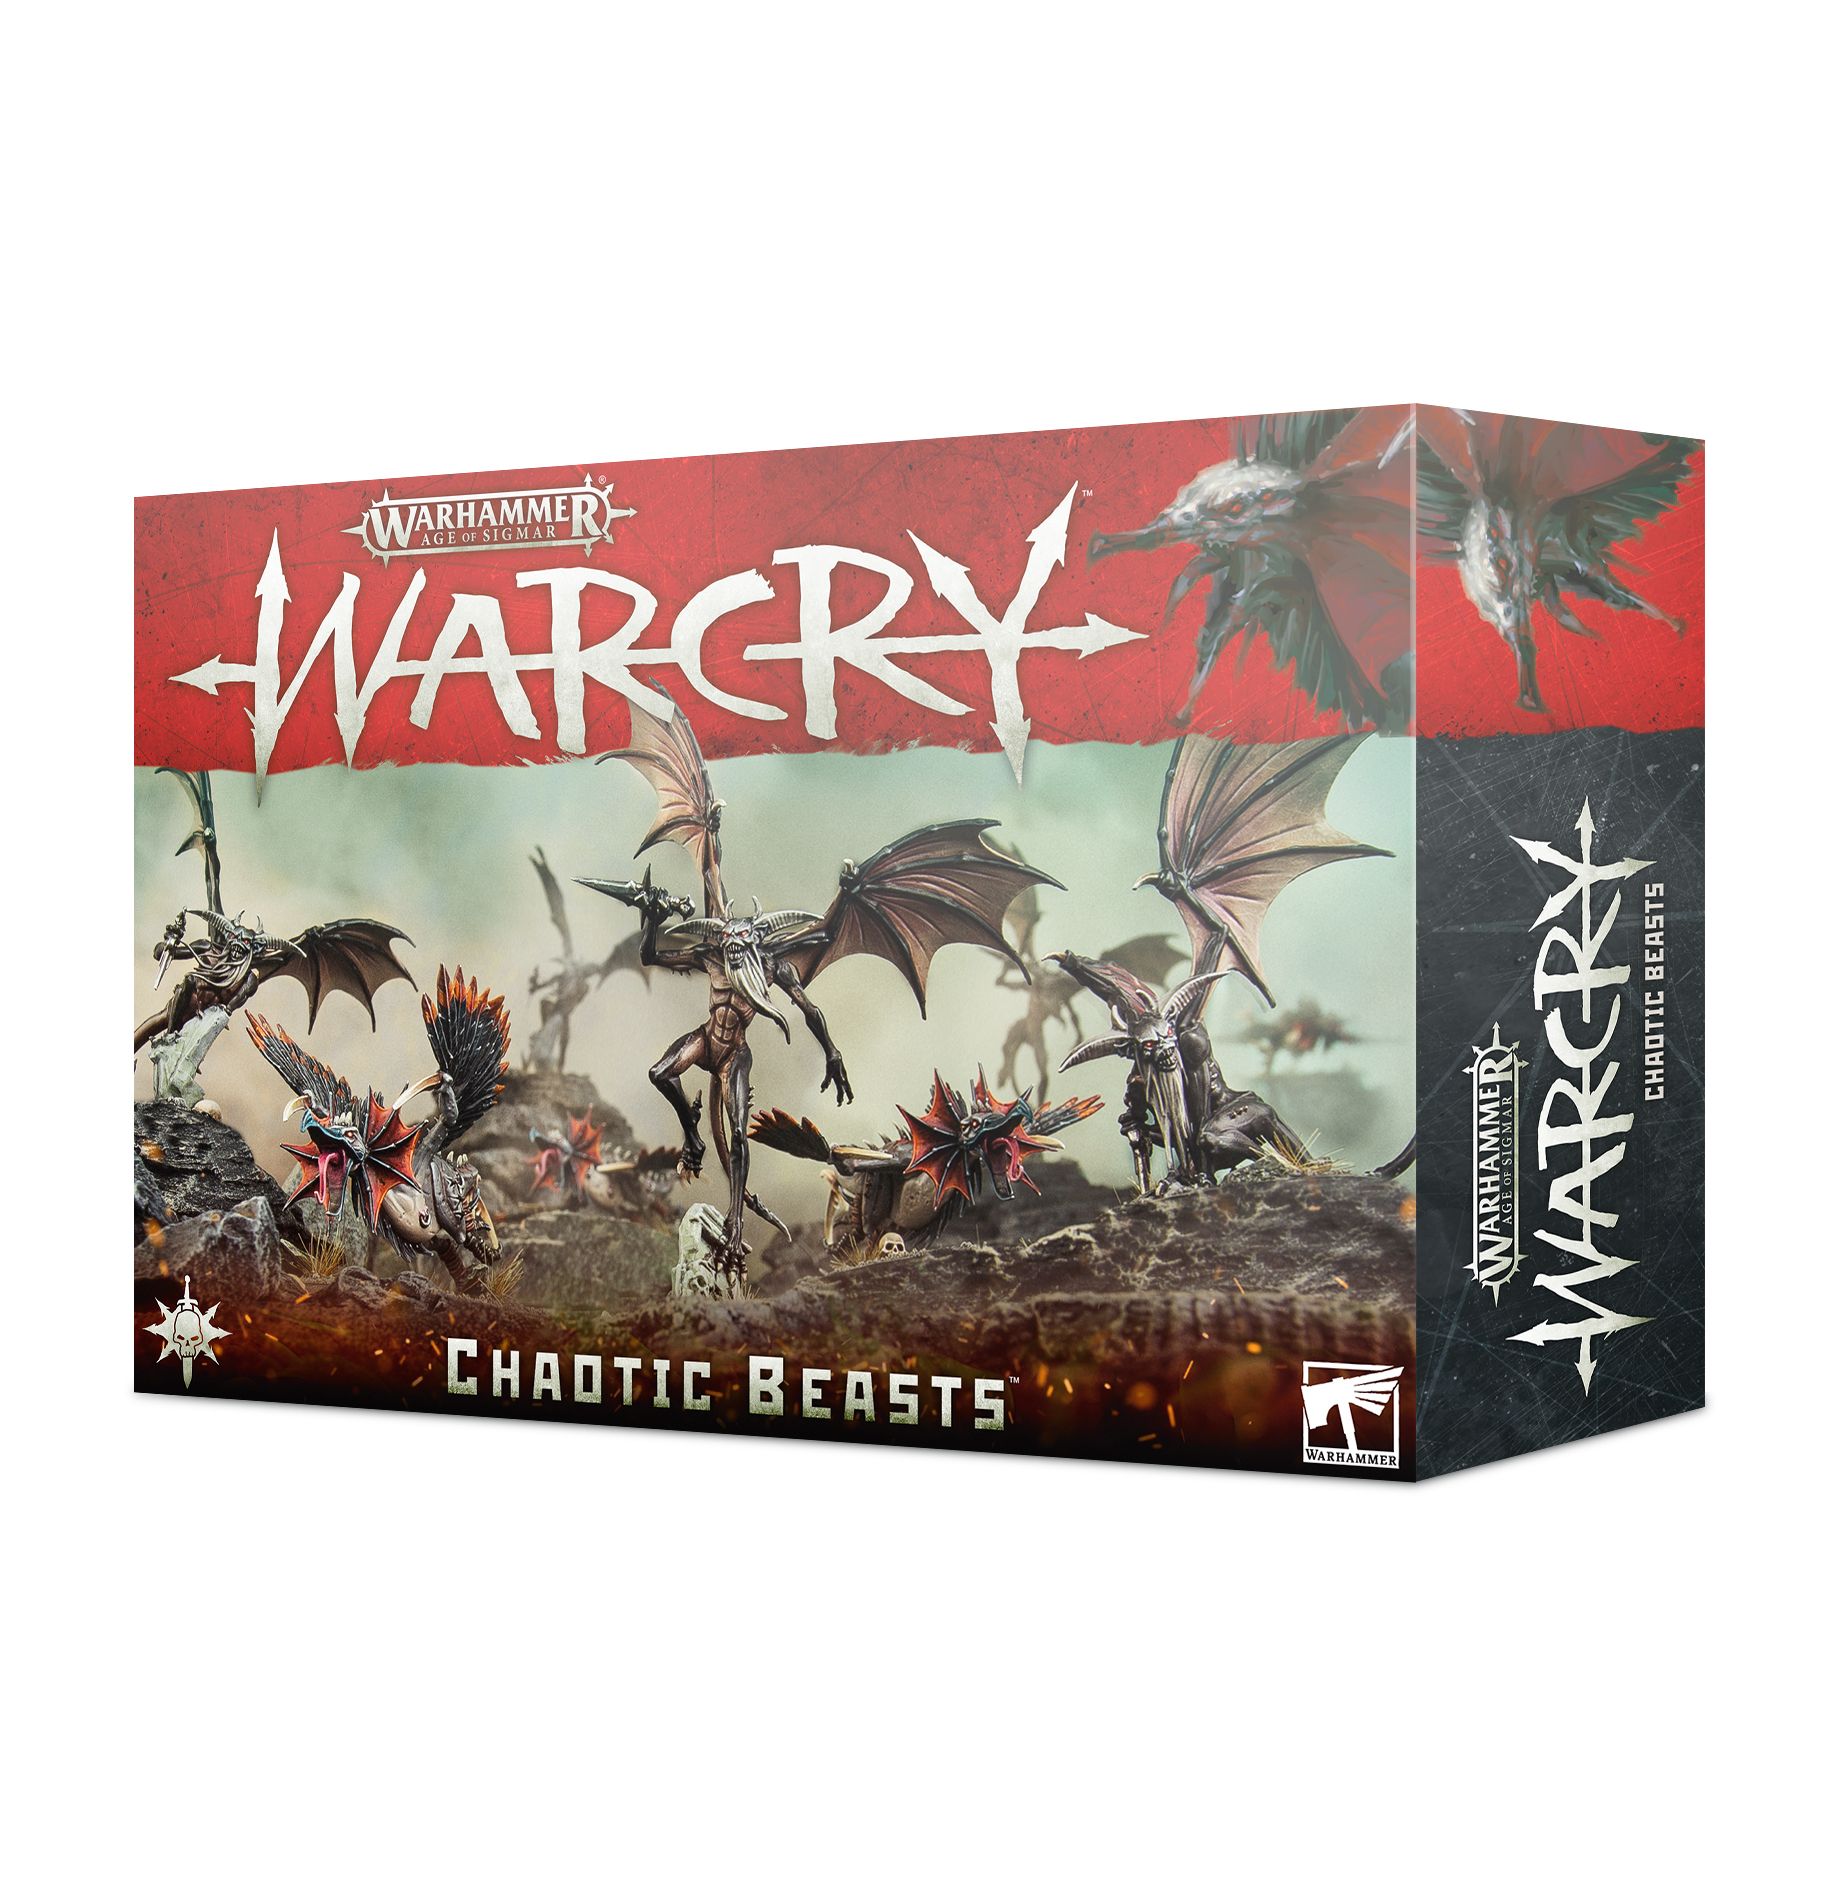 Warhammer Warcry: Chaotic Beasts